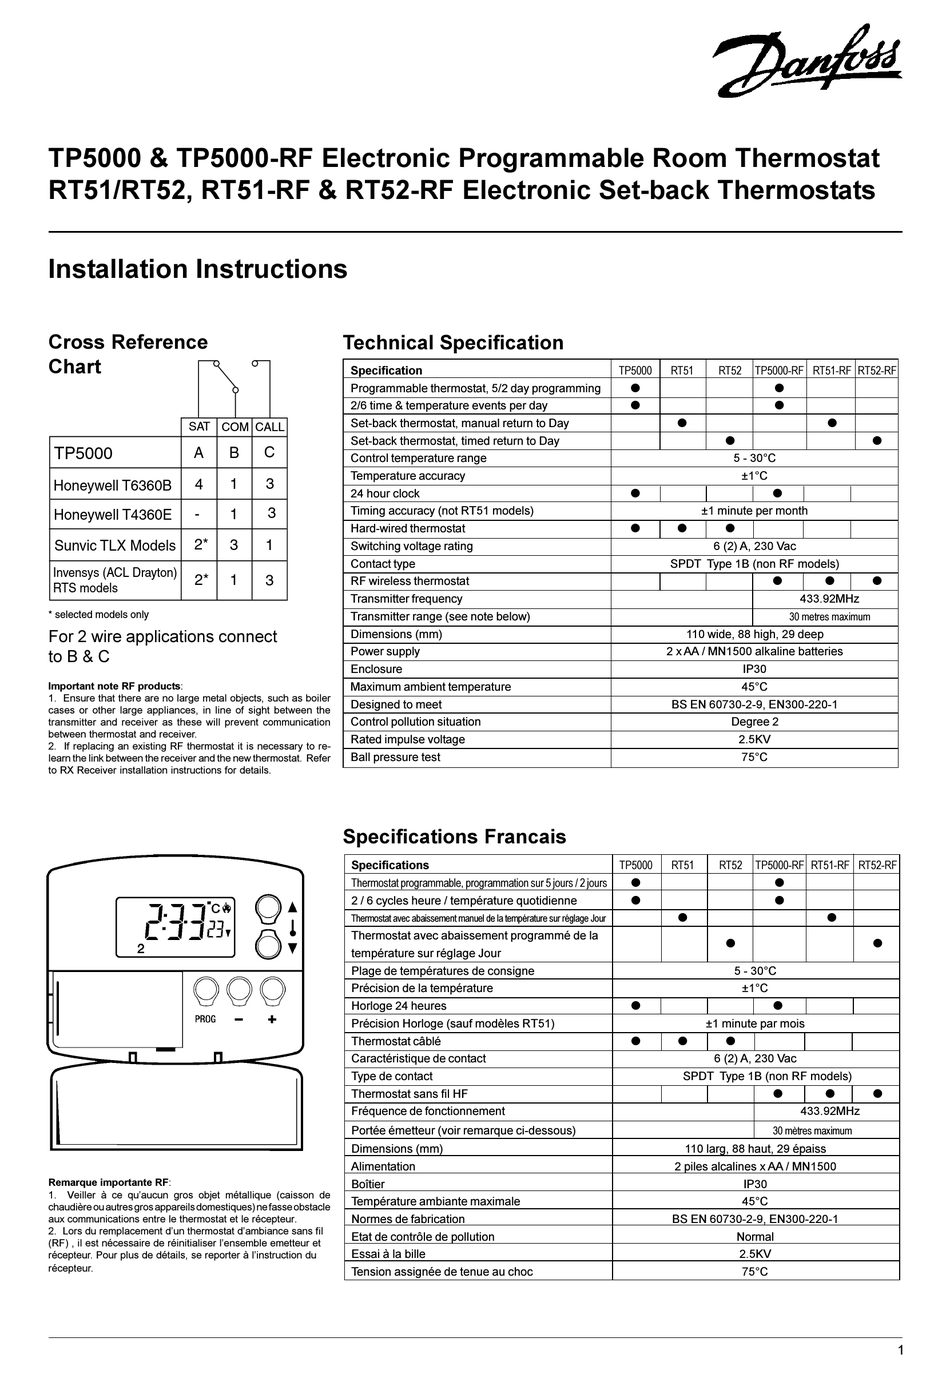 Danfoss Tp5000si Programmable Room Thermostat Wiring Diagram - Wiring .